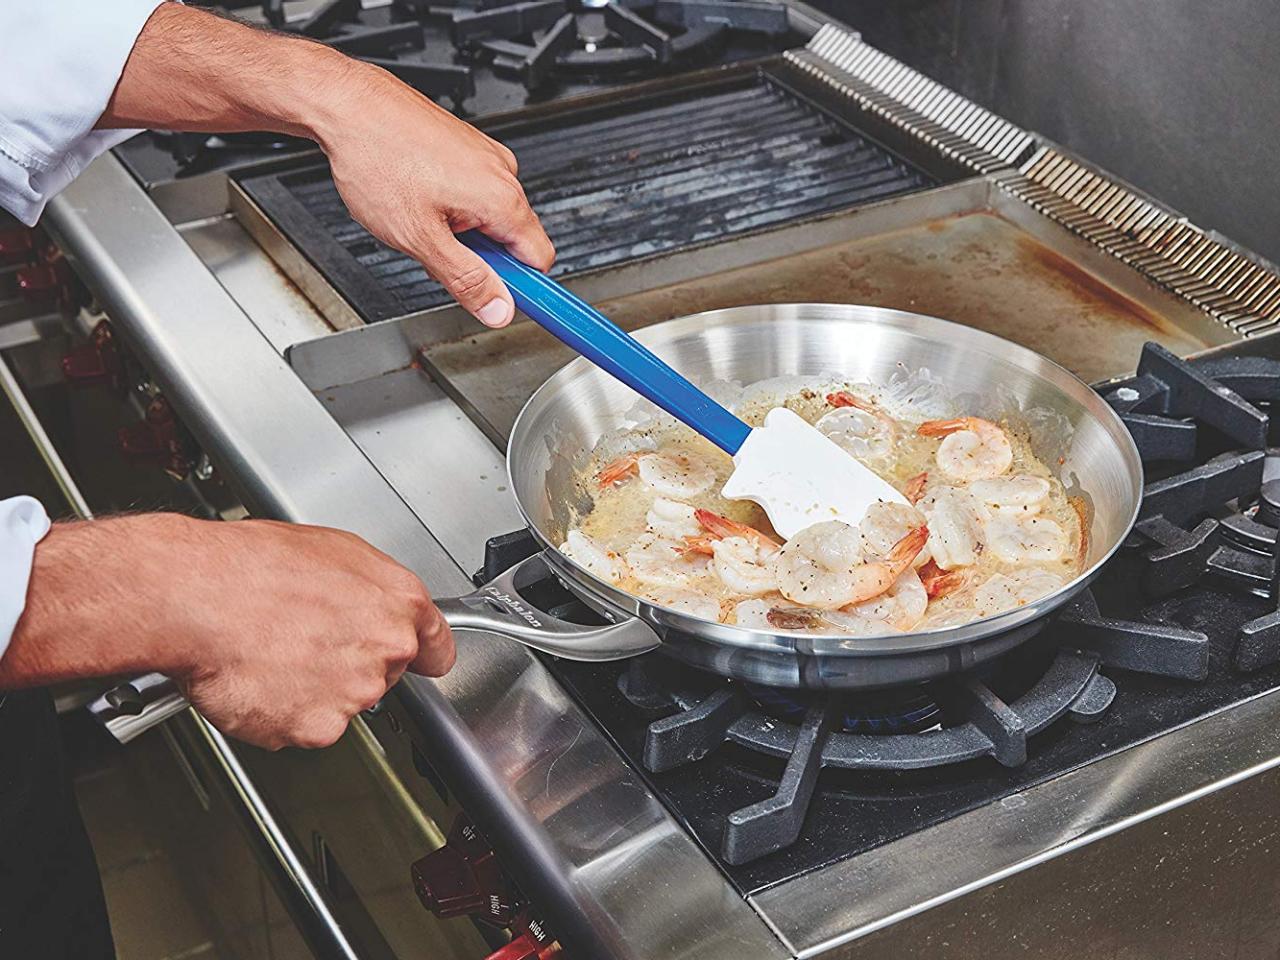 https://food.fnr.sndimg.com/content/dam/images/food/products/2019/8/1/rx_rubbermaid-commercial-high-heat-silicon-spatula.jpeg.rend.hgtvcom.1280.960.suffix/1564685421065.jpeg